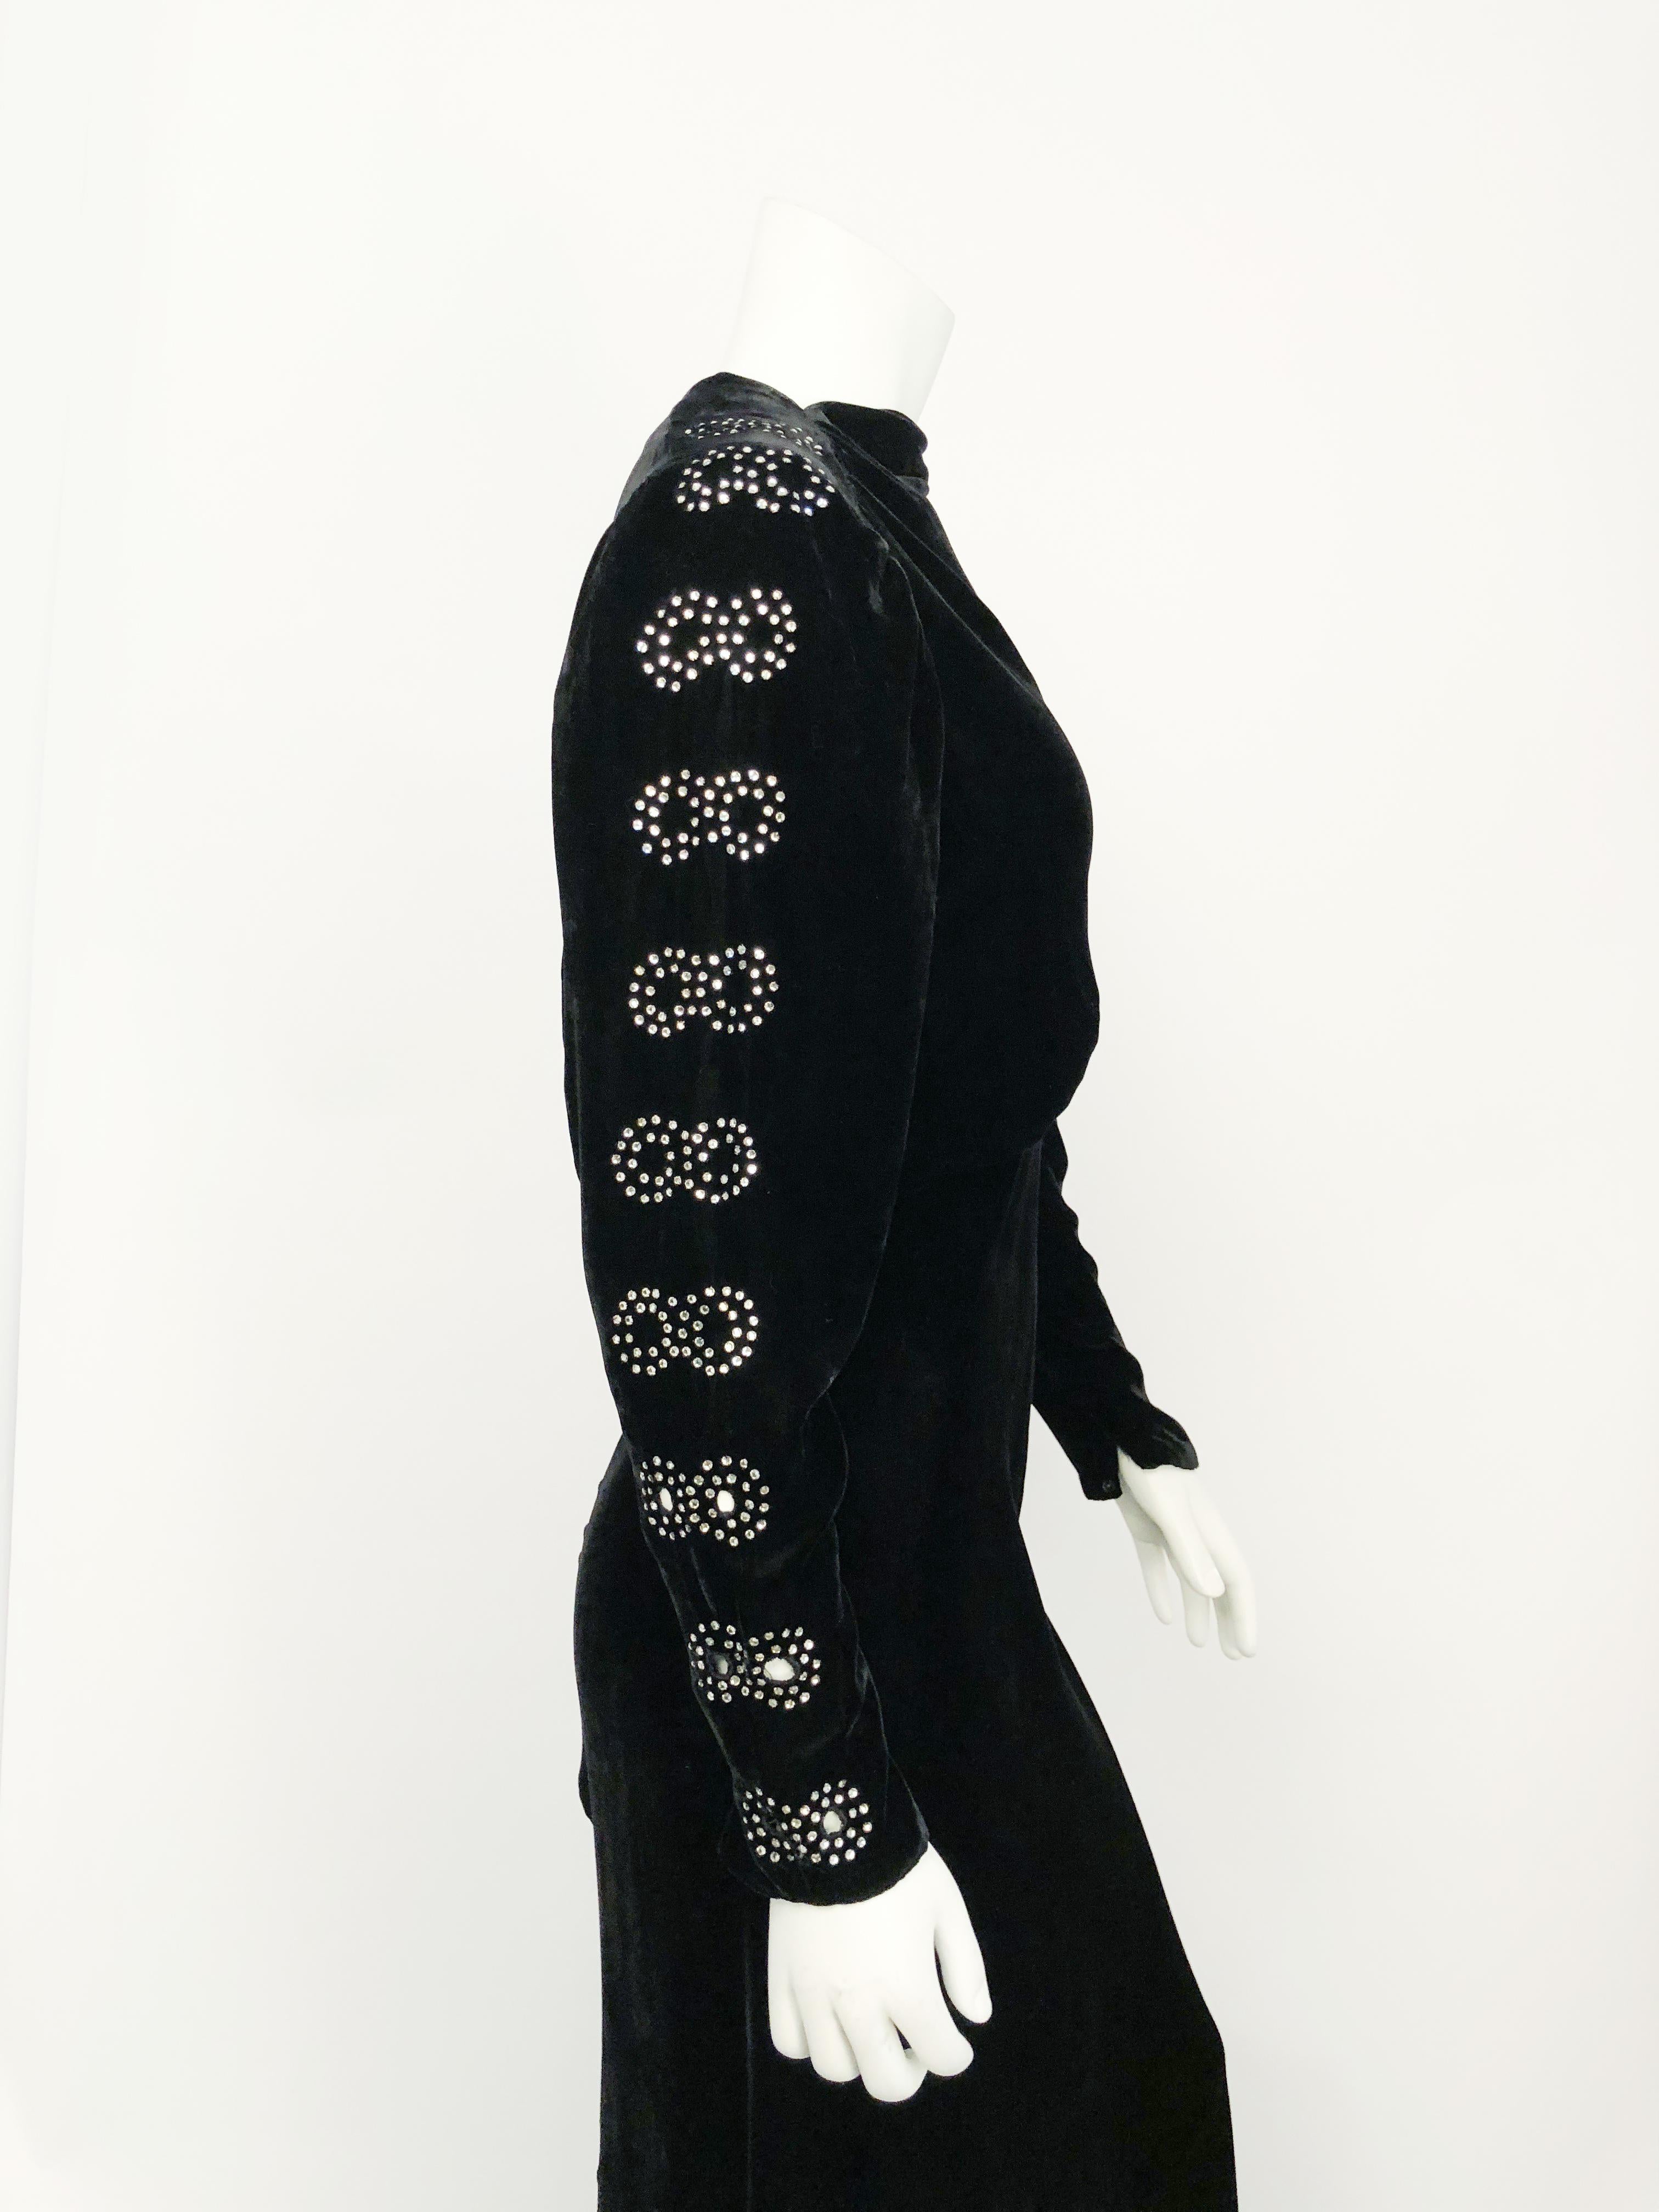 Black Silk Velvet Gown with Rhinestone Accents, 1930s  In Good Condition For Sale In San Francisco, CA